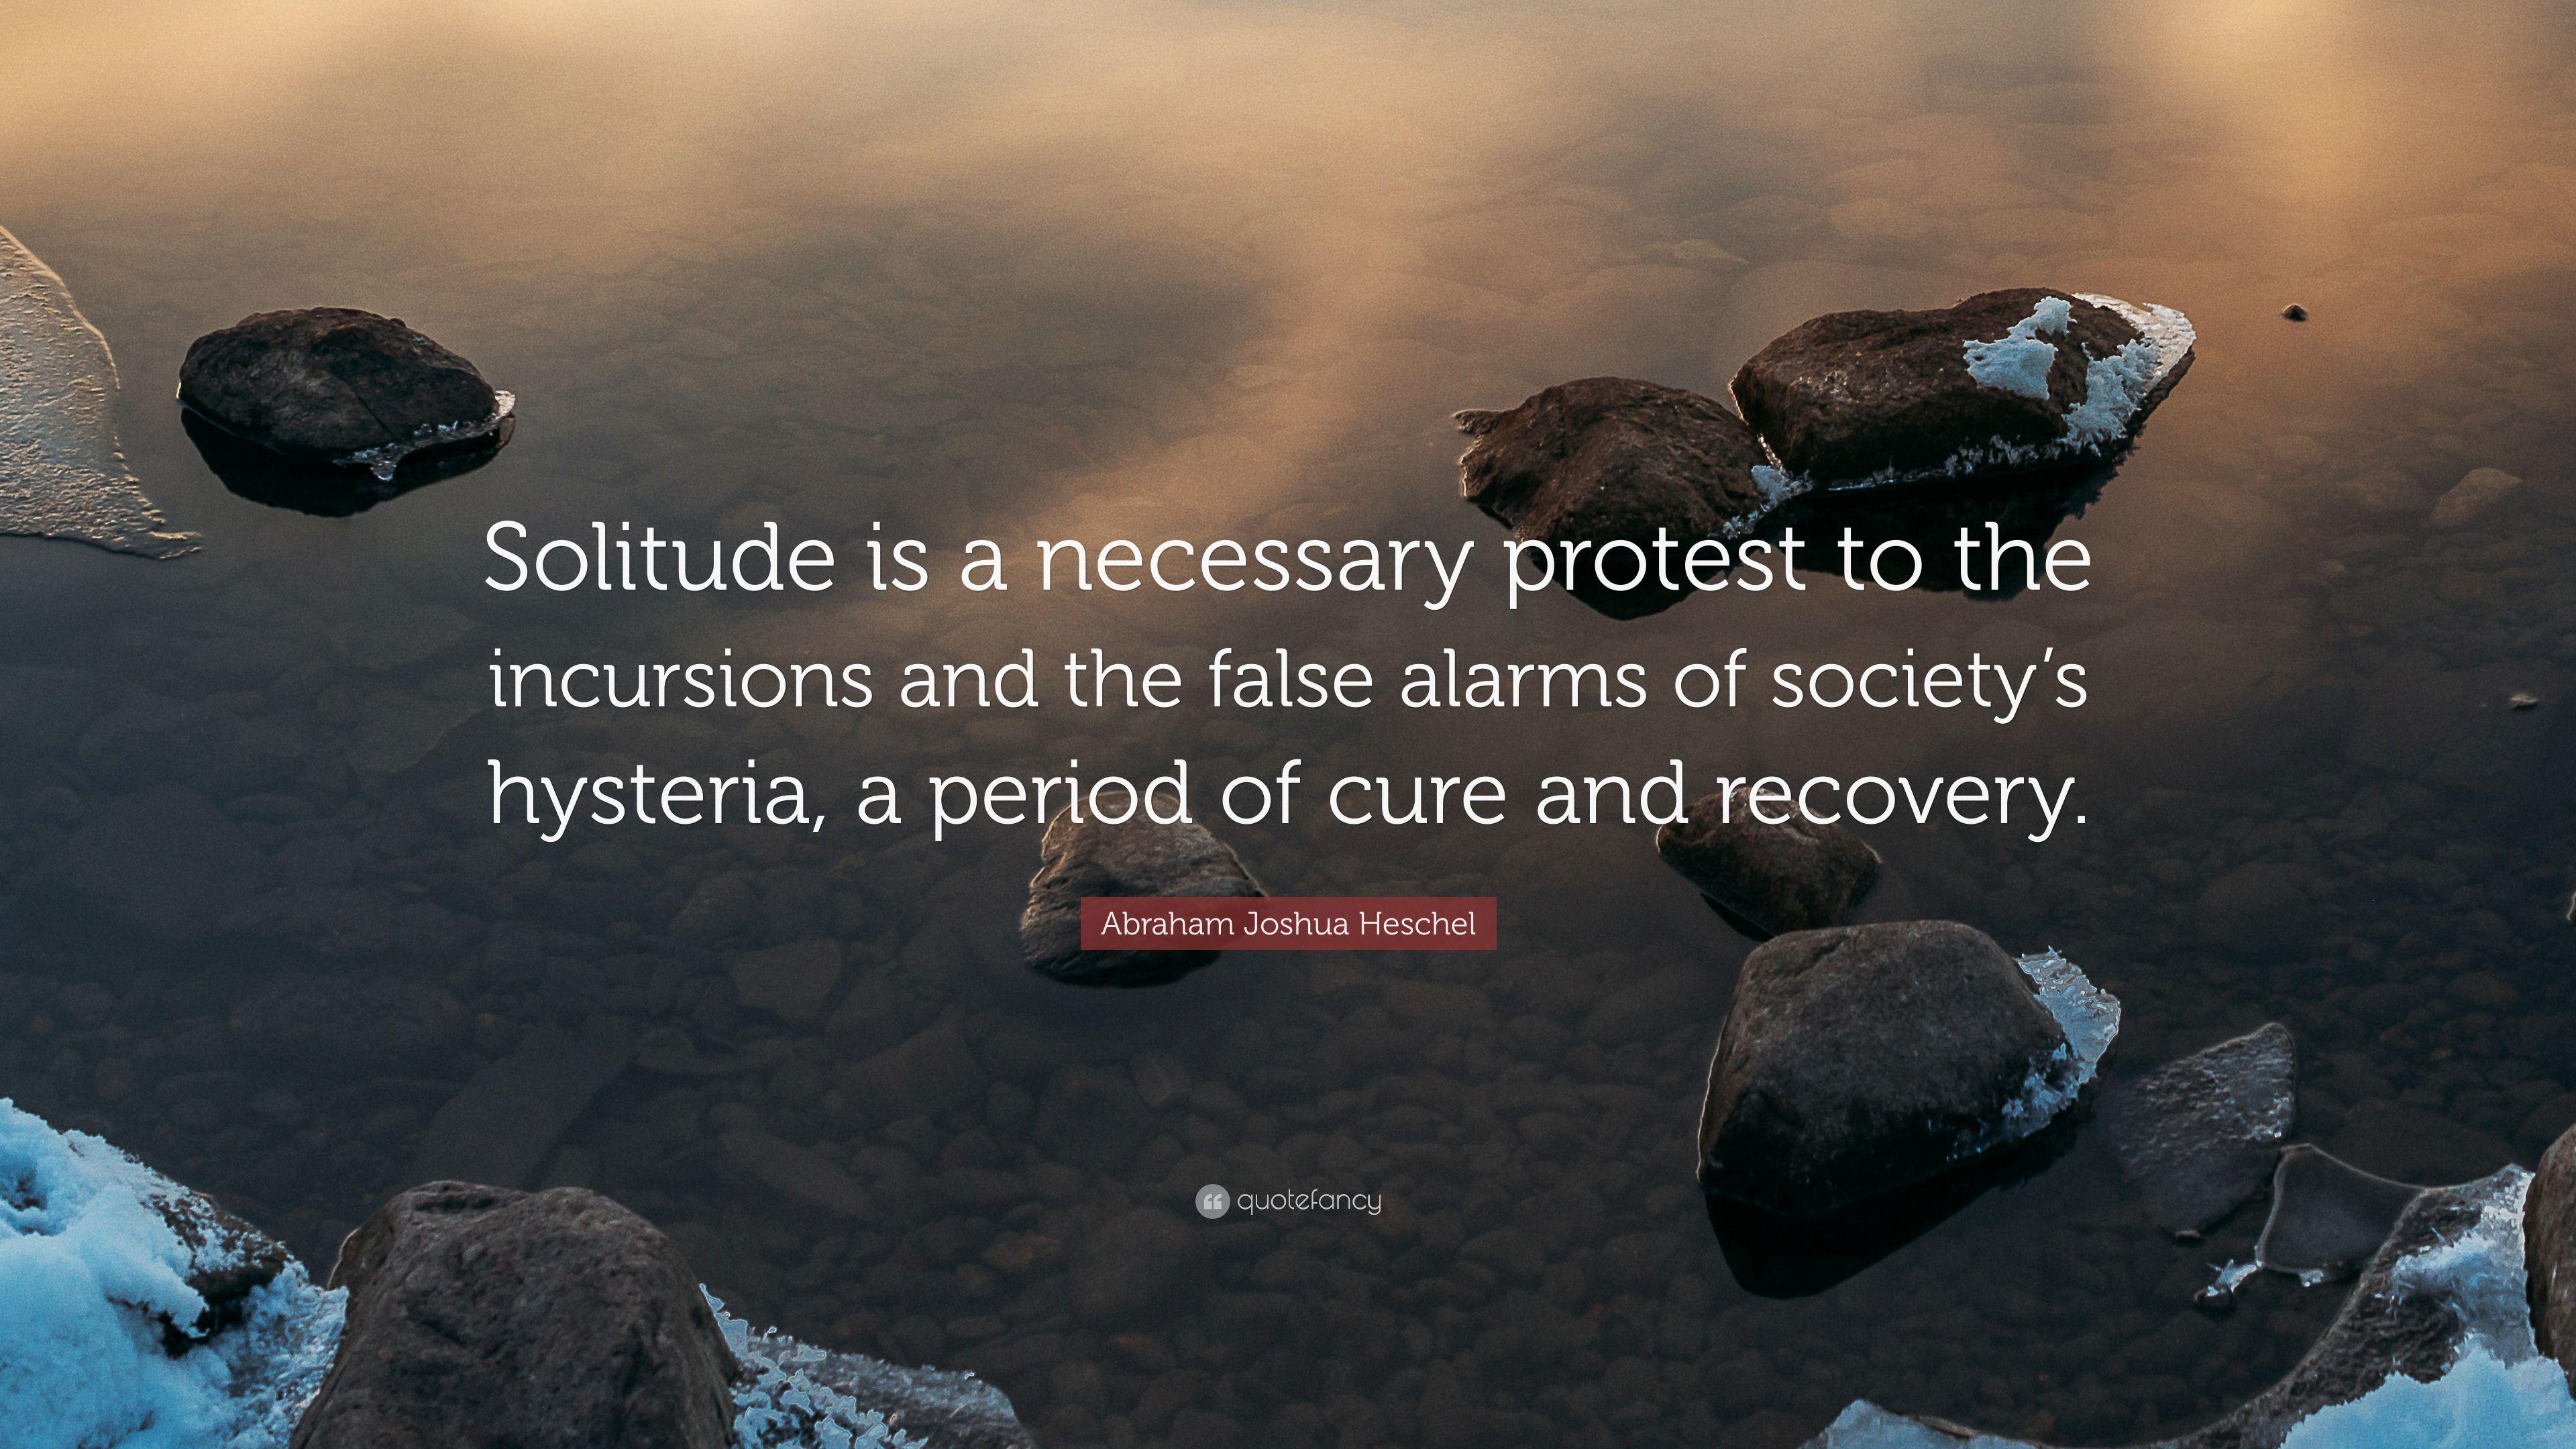 Abraham Joshua Heschel Quote: “Solitude is a necessary protest to